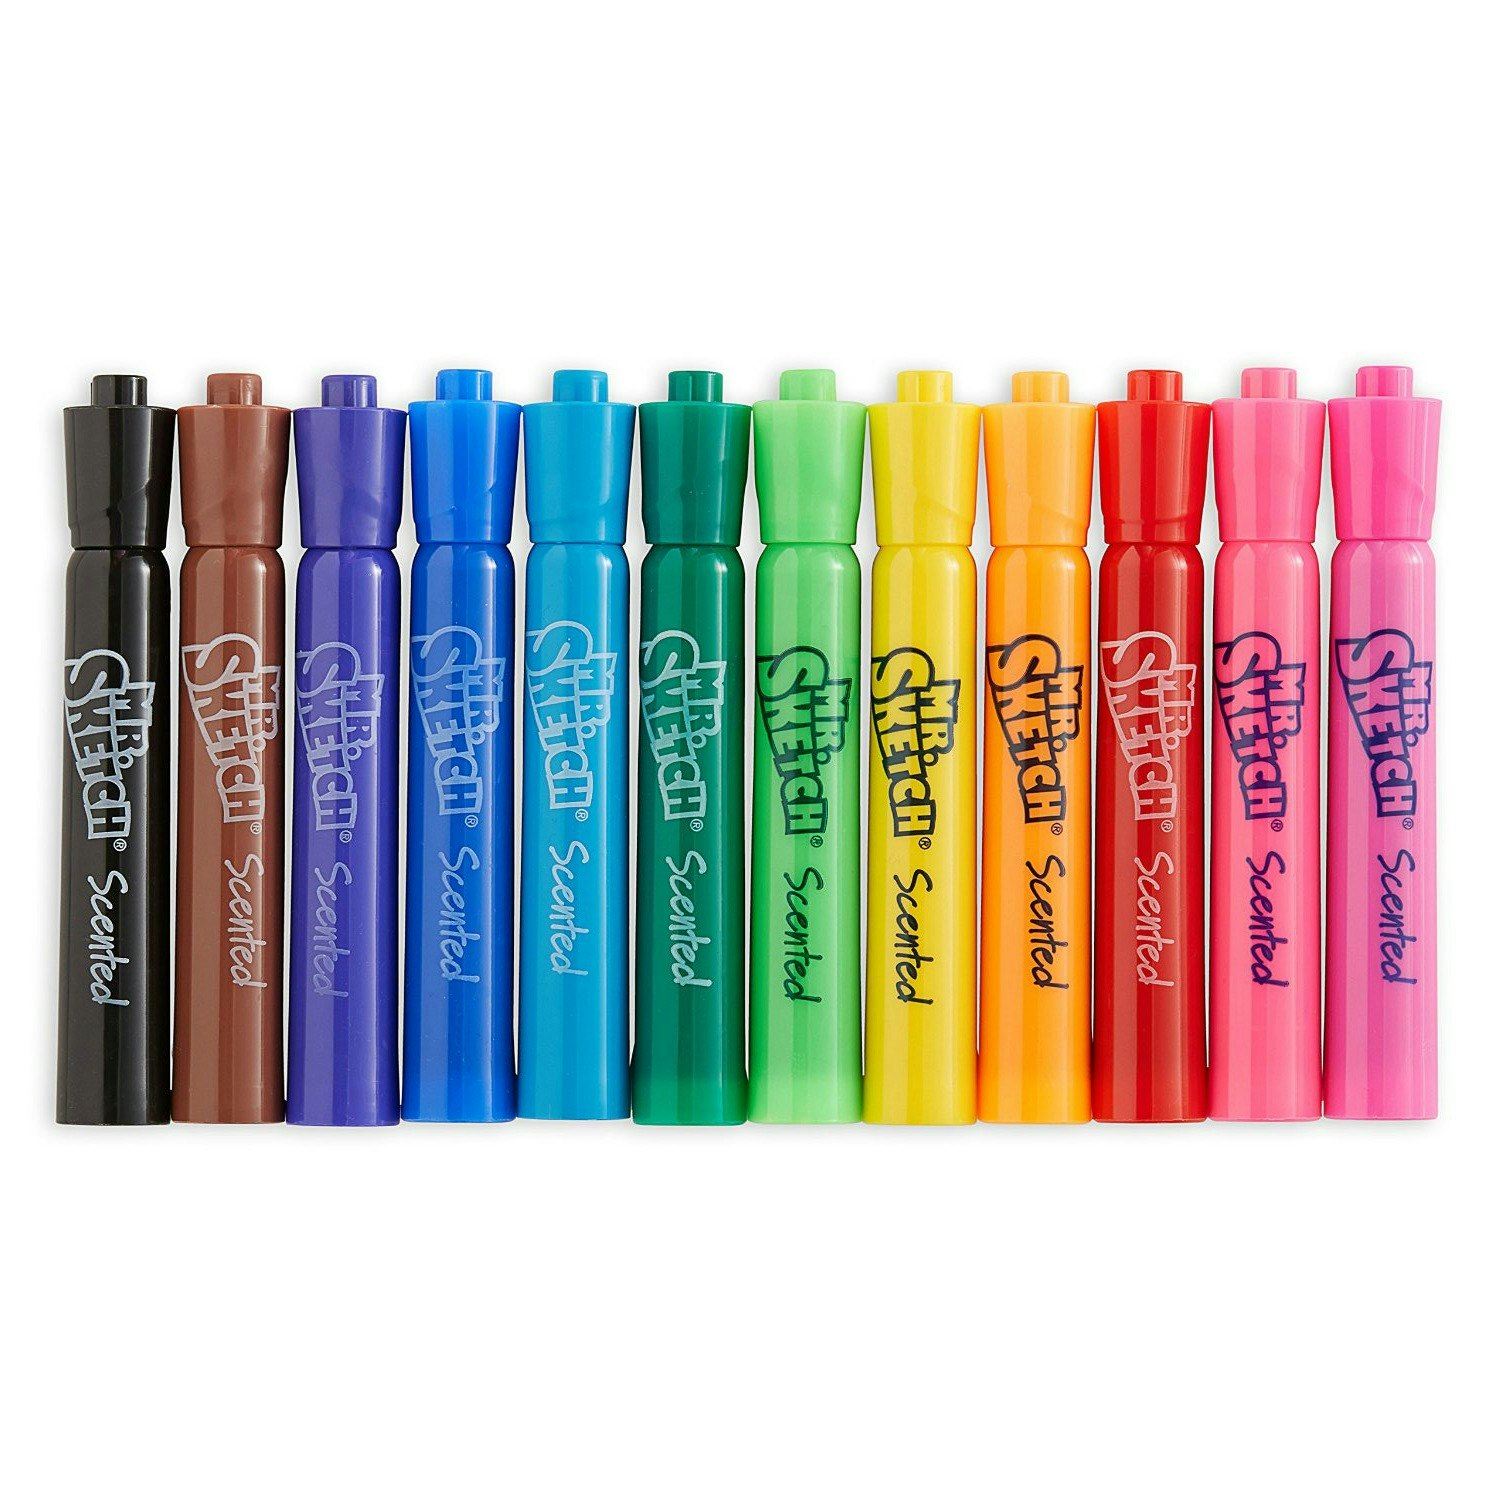 mr scent markers